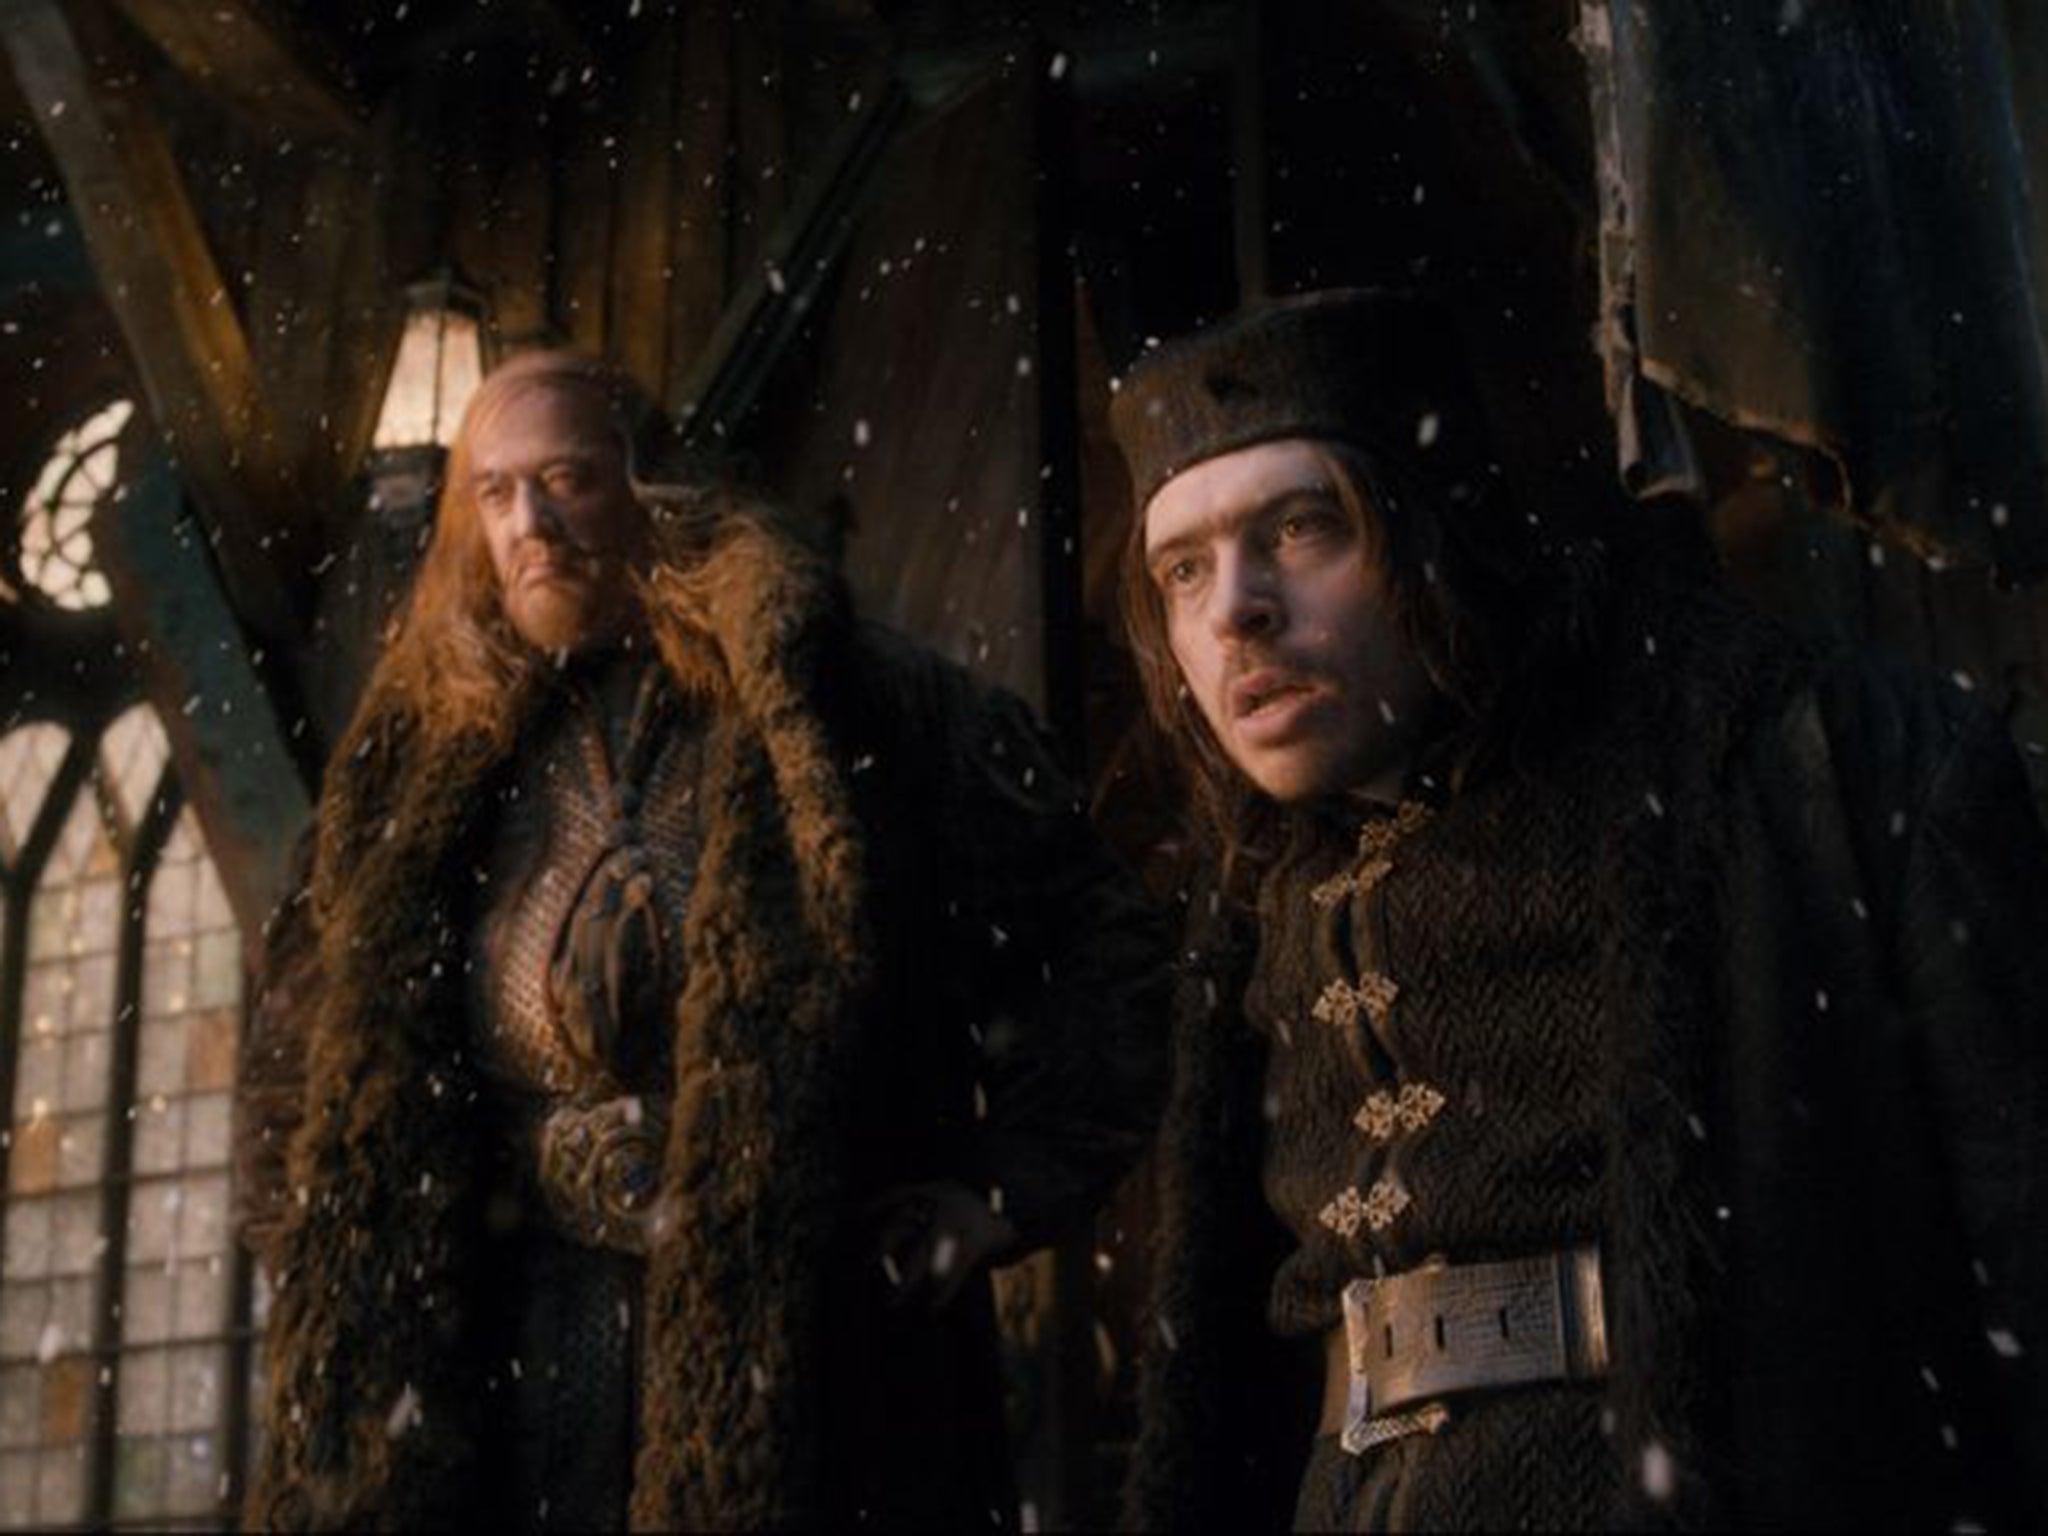 Stephen Fry, left, as the Master of Laketown in The Hobbit